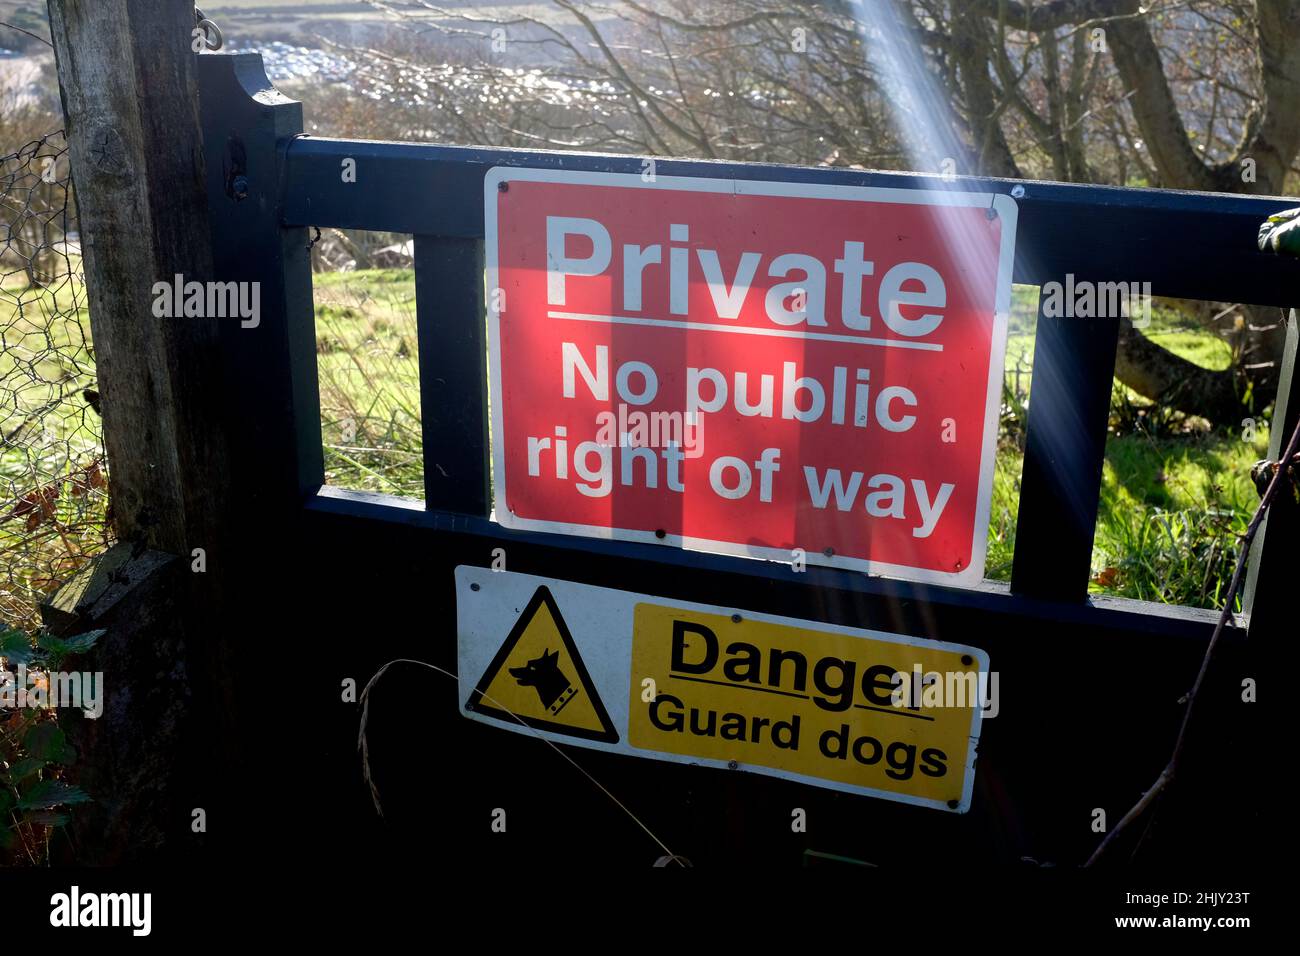 sign,private,no,public,right,of,way,danger,guard,dog,country,land,farm,gate,fence,access,accessible,activity,active,path,walking,Isle of Wight, Stock Photo